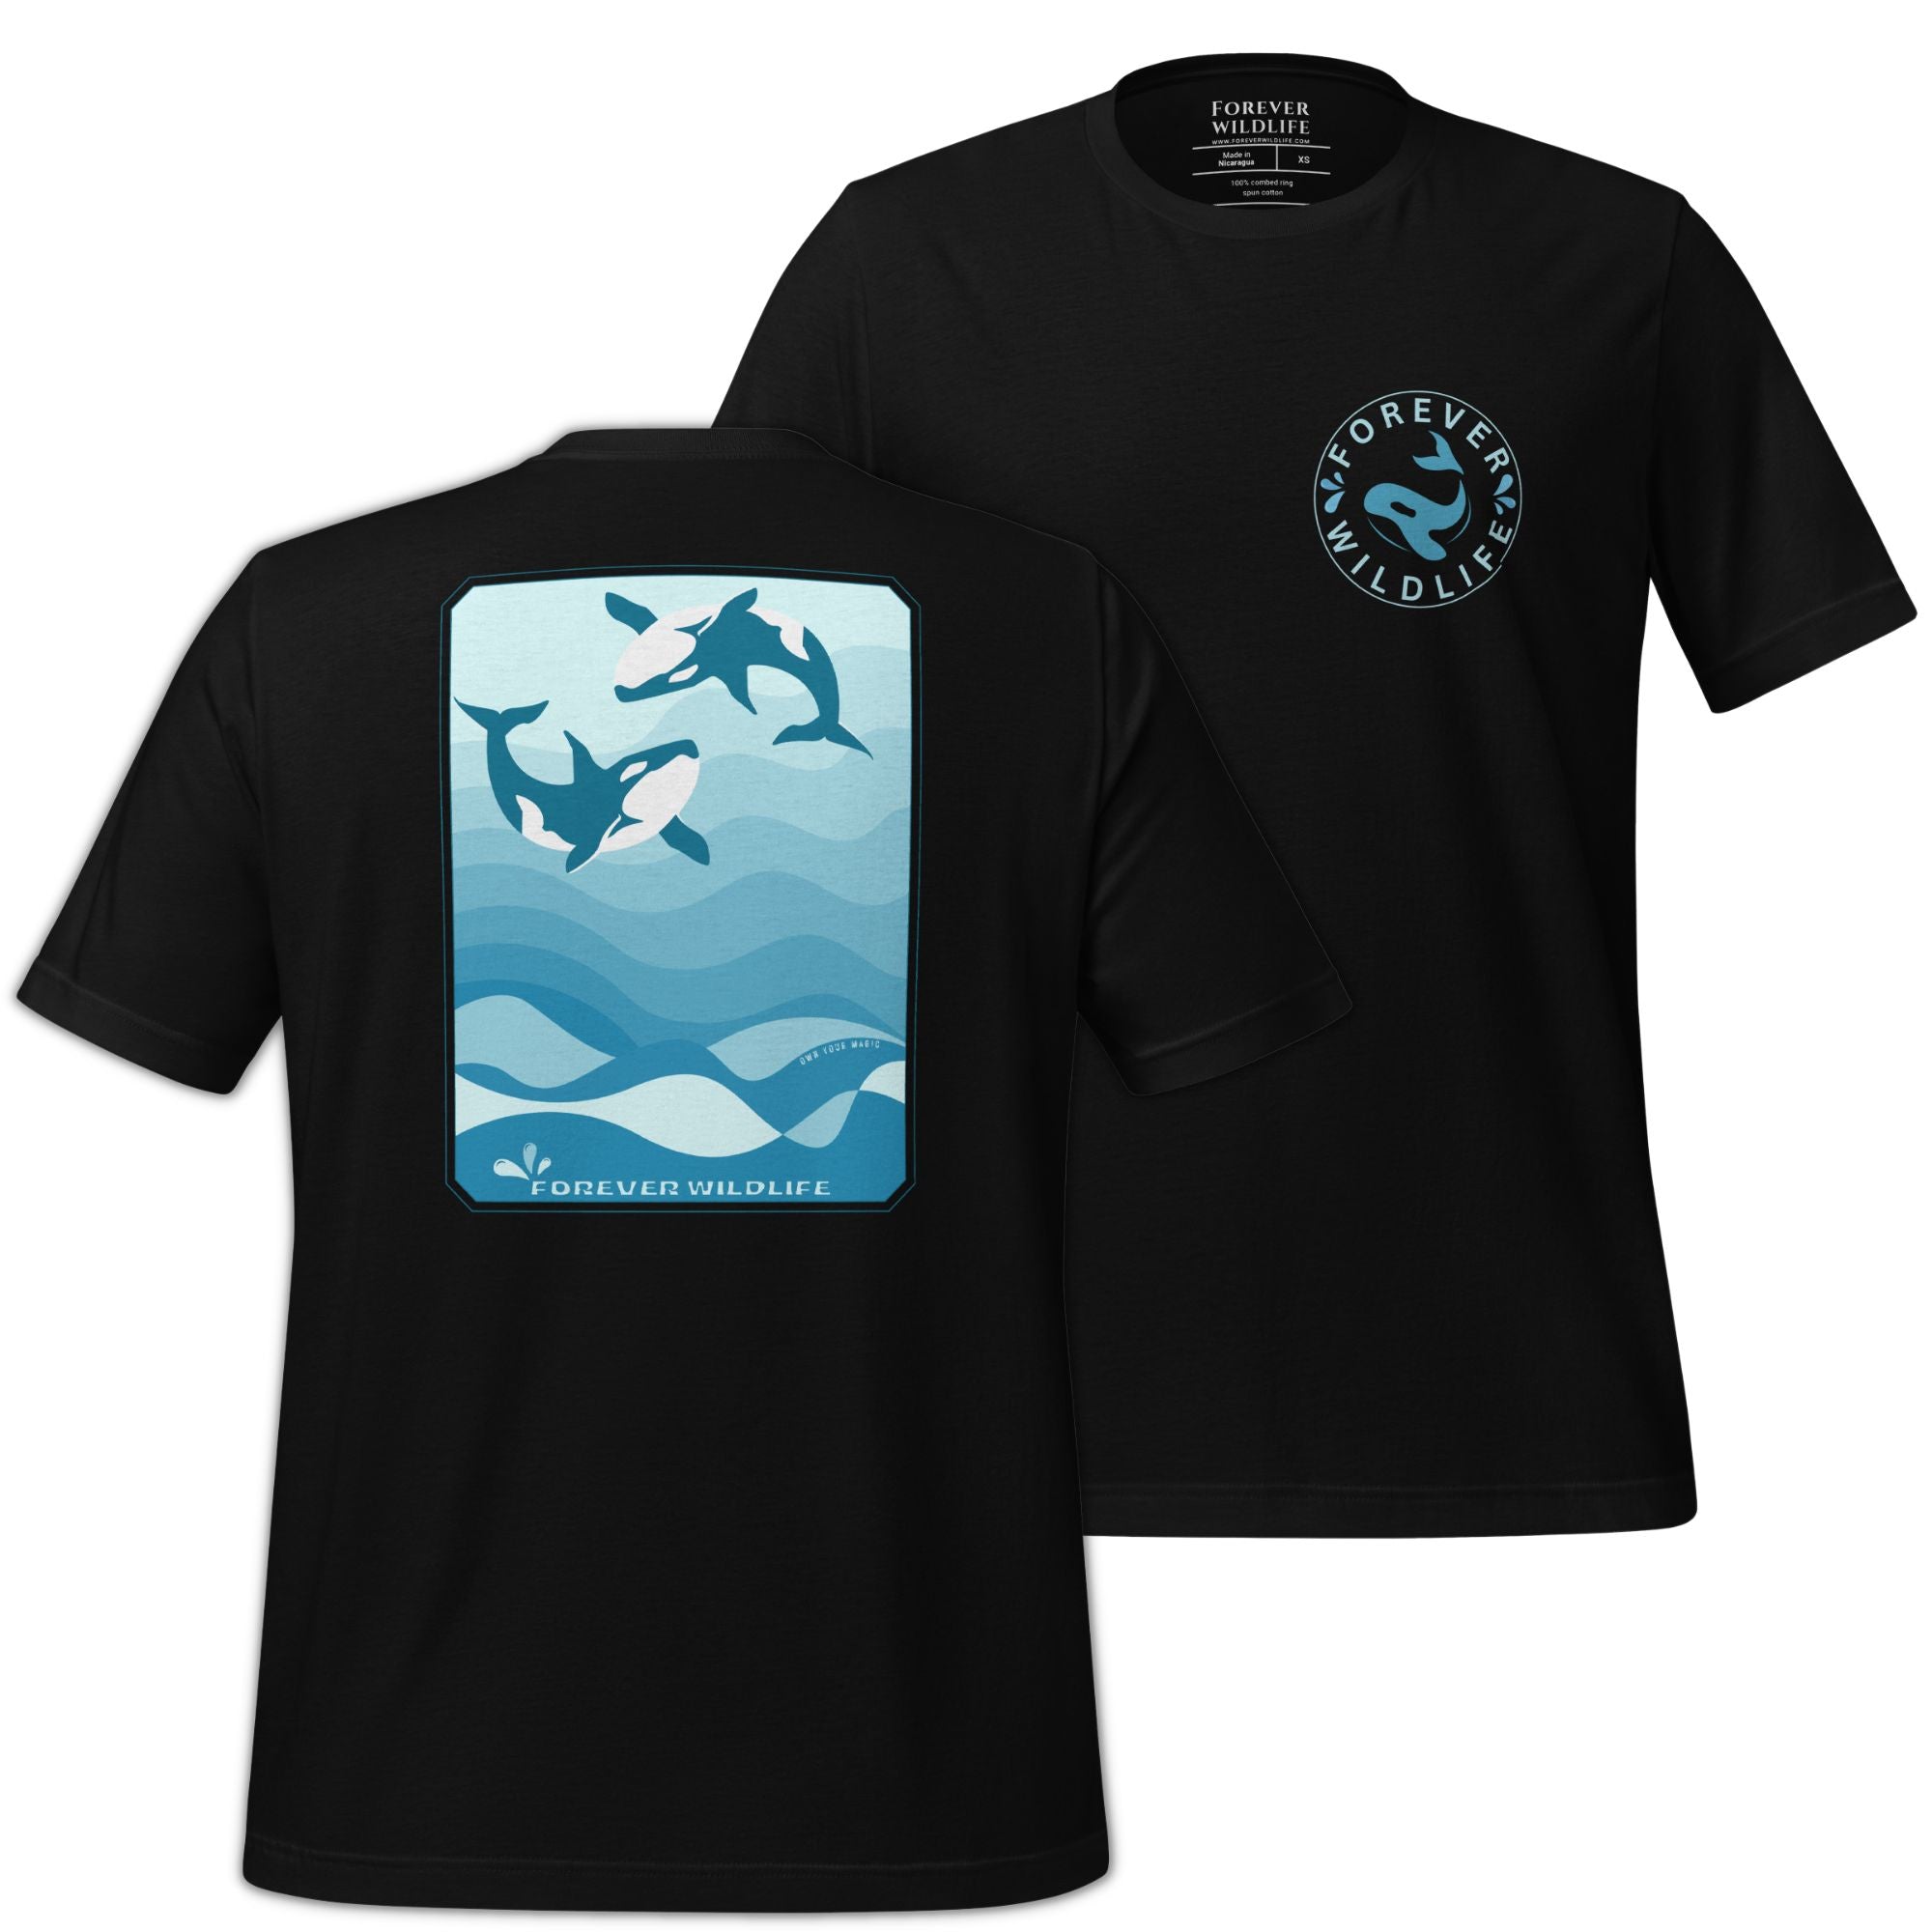 Orca Shirt, beautiful Black Orca T-Shirt with Killer Whales on the shirt by Forever Wildlife selling Wildlife T Shirts.